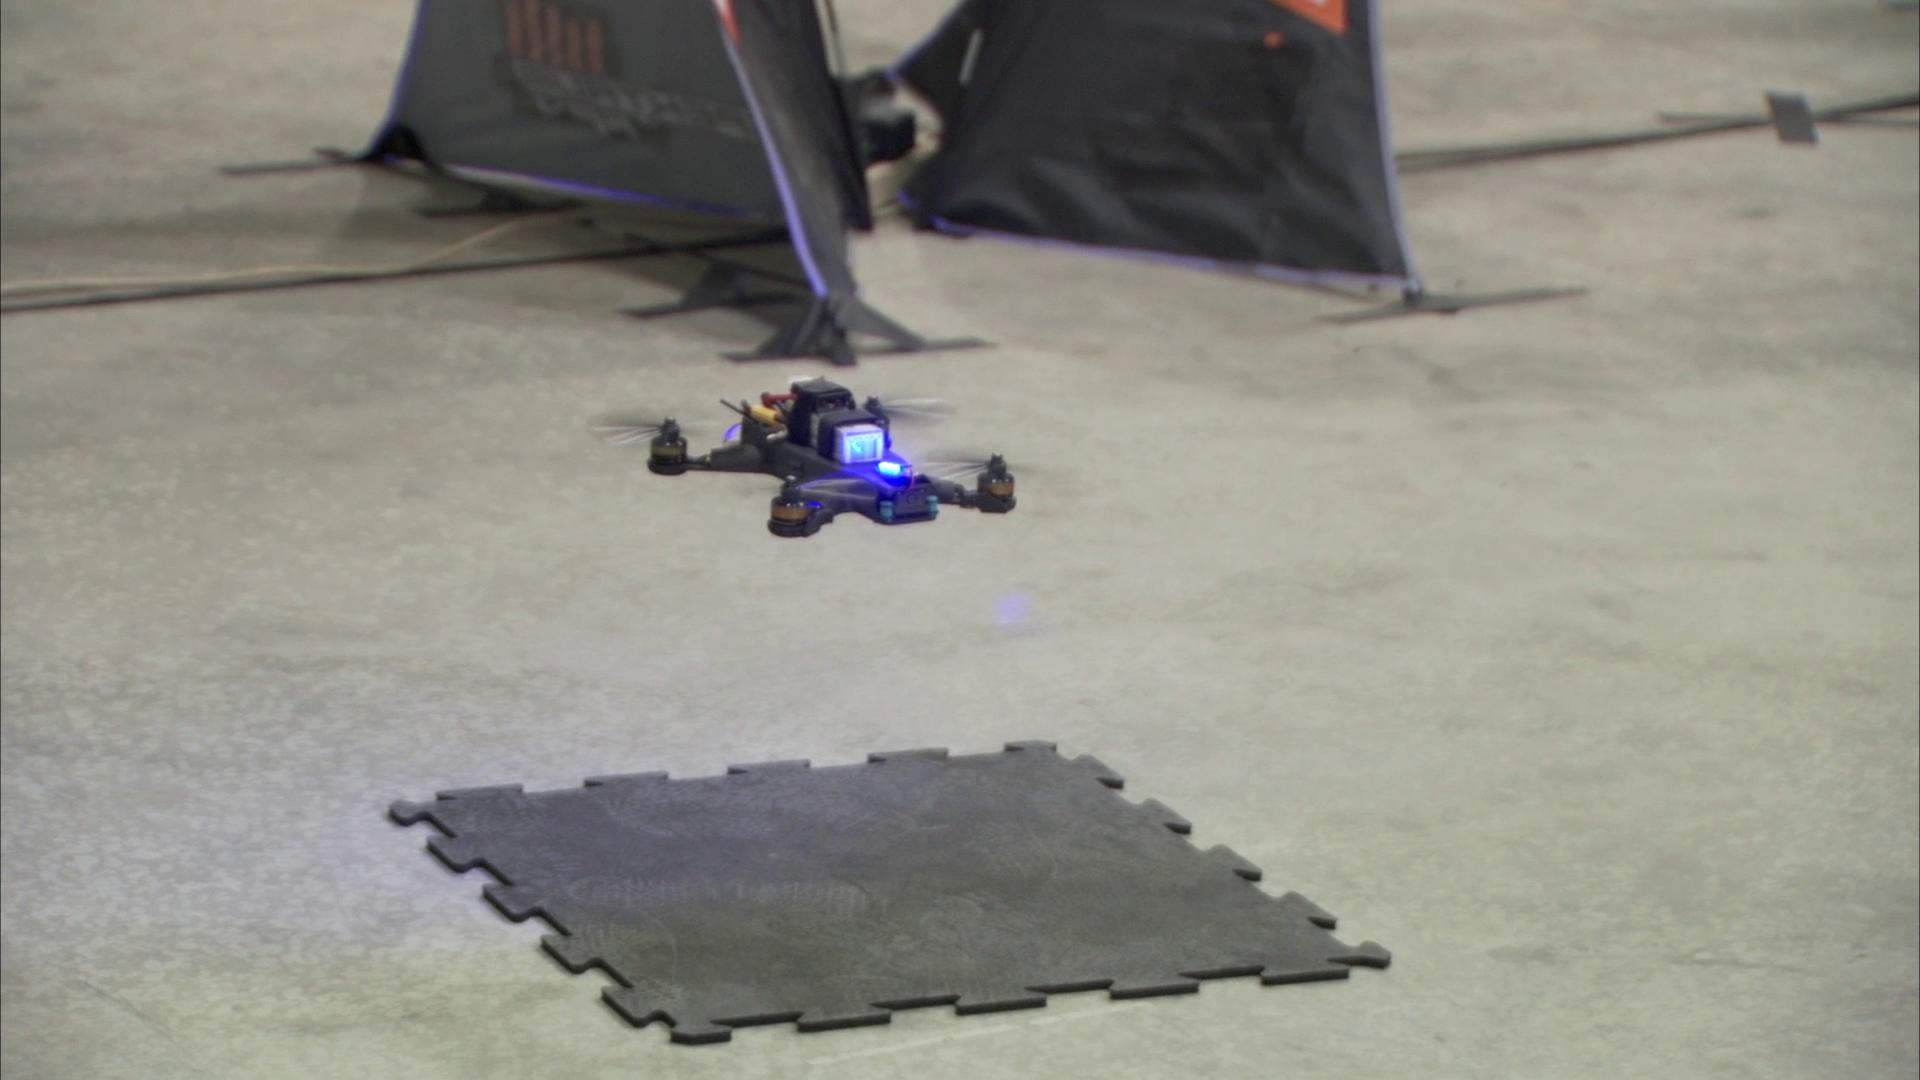 Drone developed at JPL